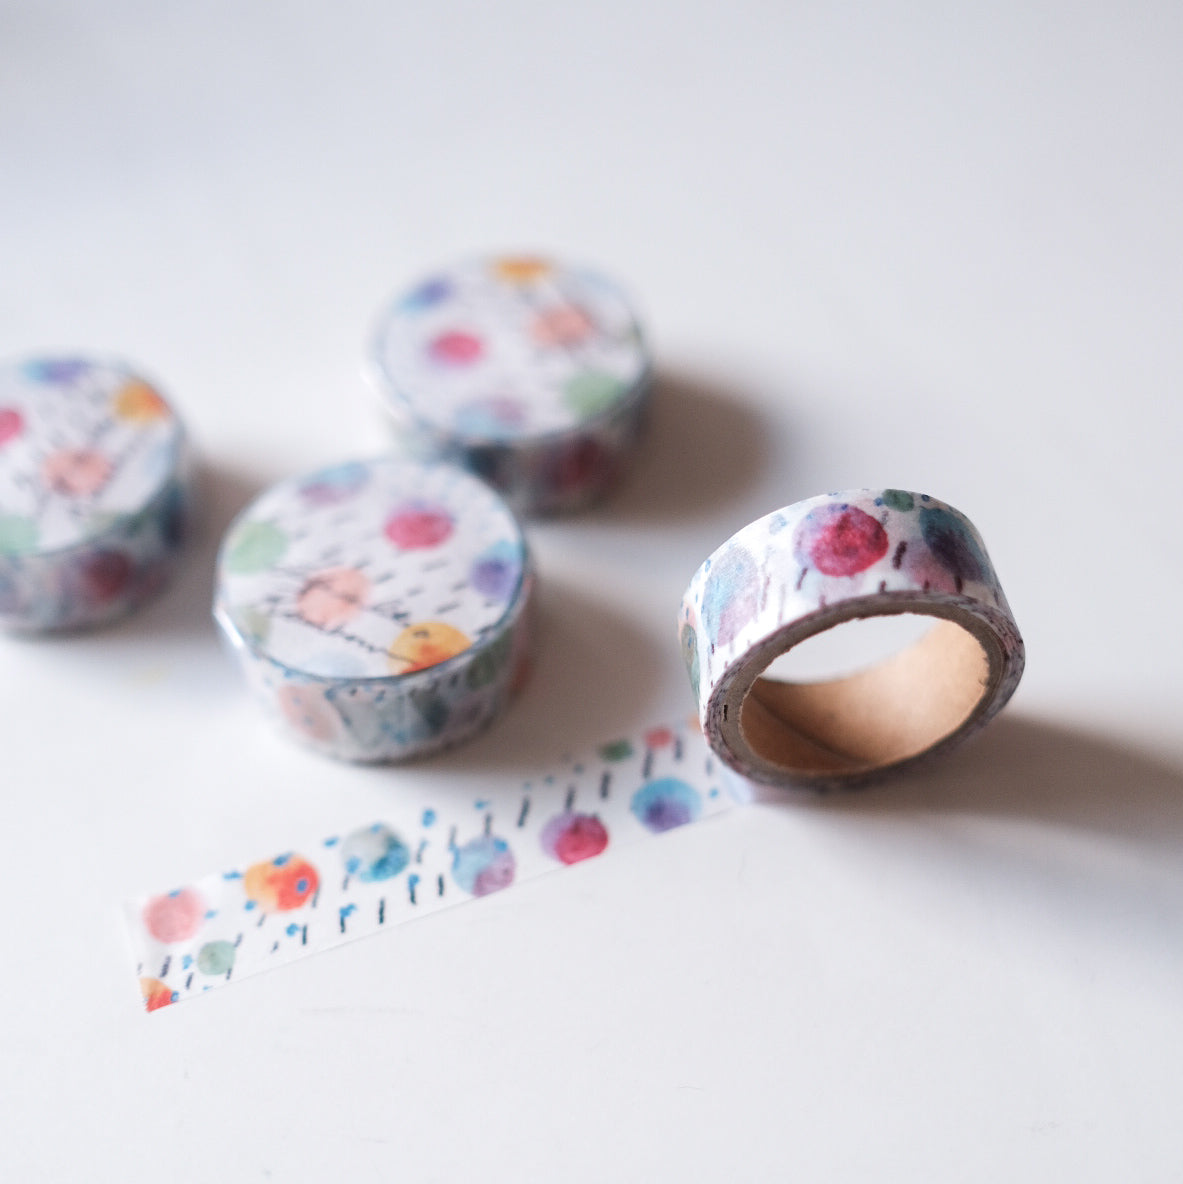 Pepperconarts x The Stationery Selection 'Life is like a rainbow' washi tape